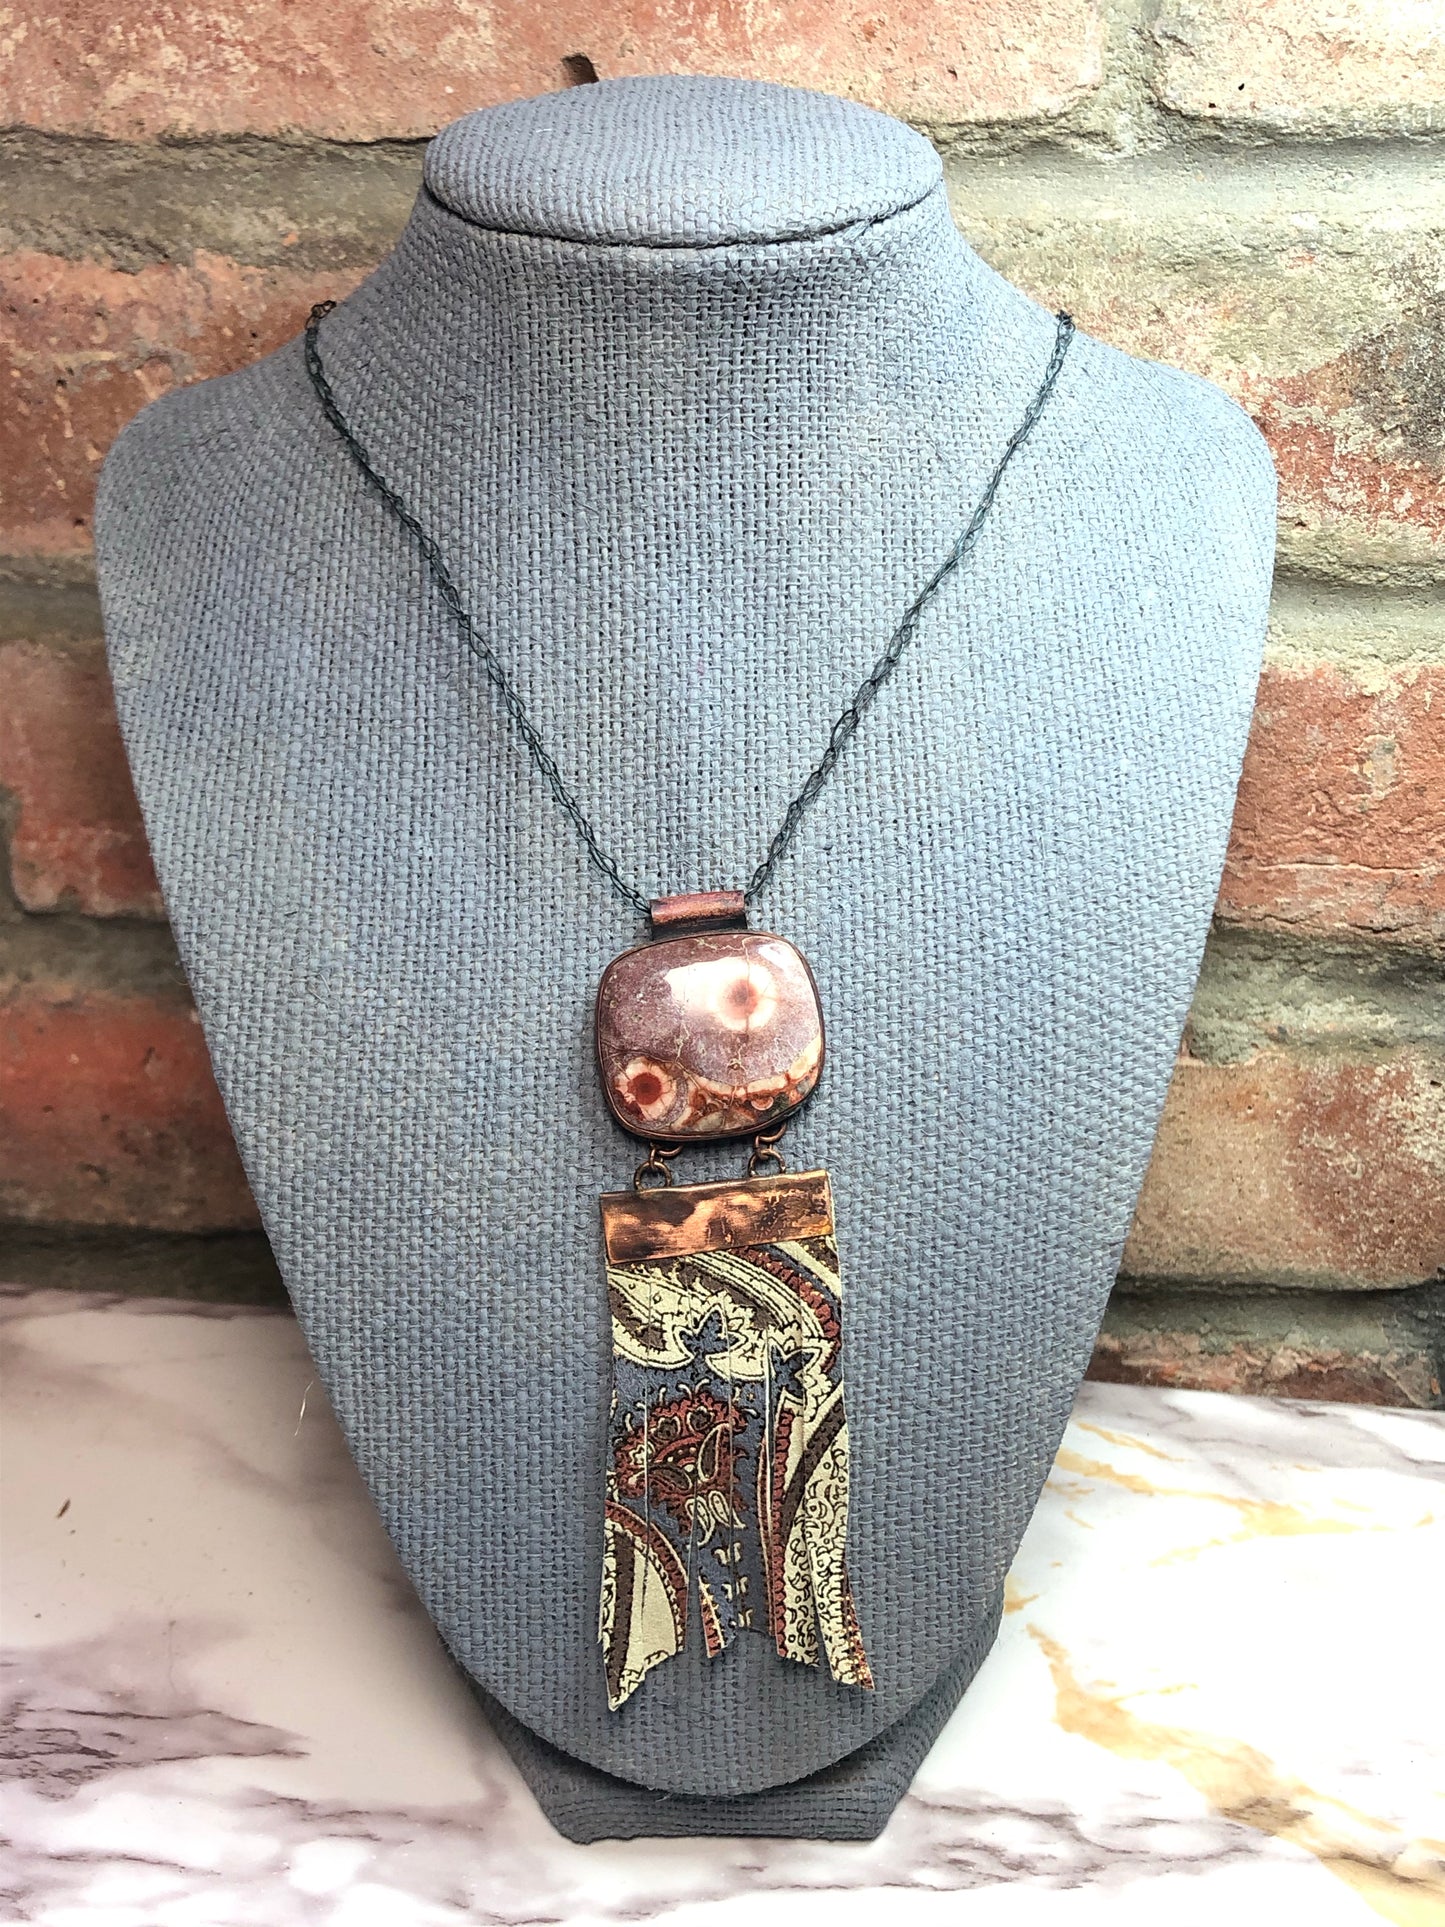 Copper, Birdseye rhyolite, and embossed leather necklace